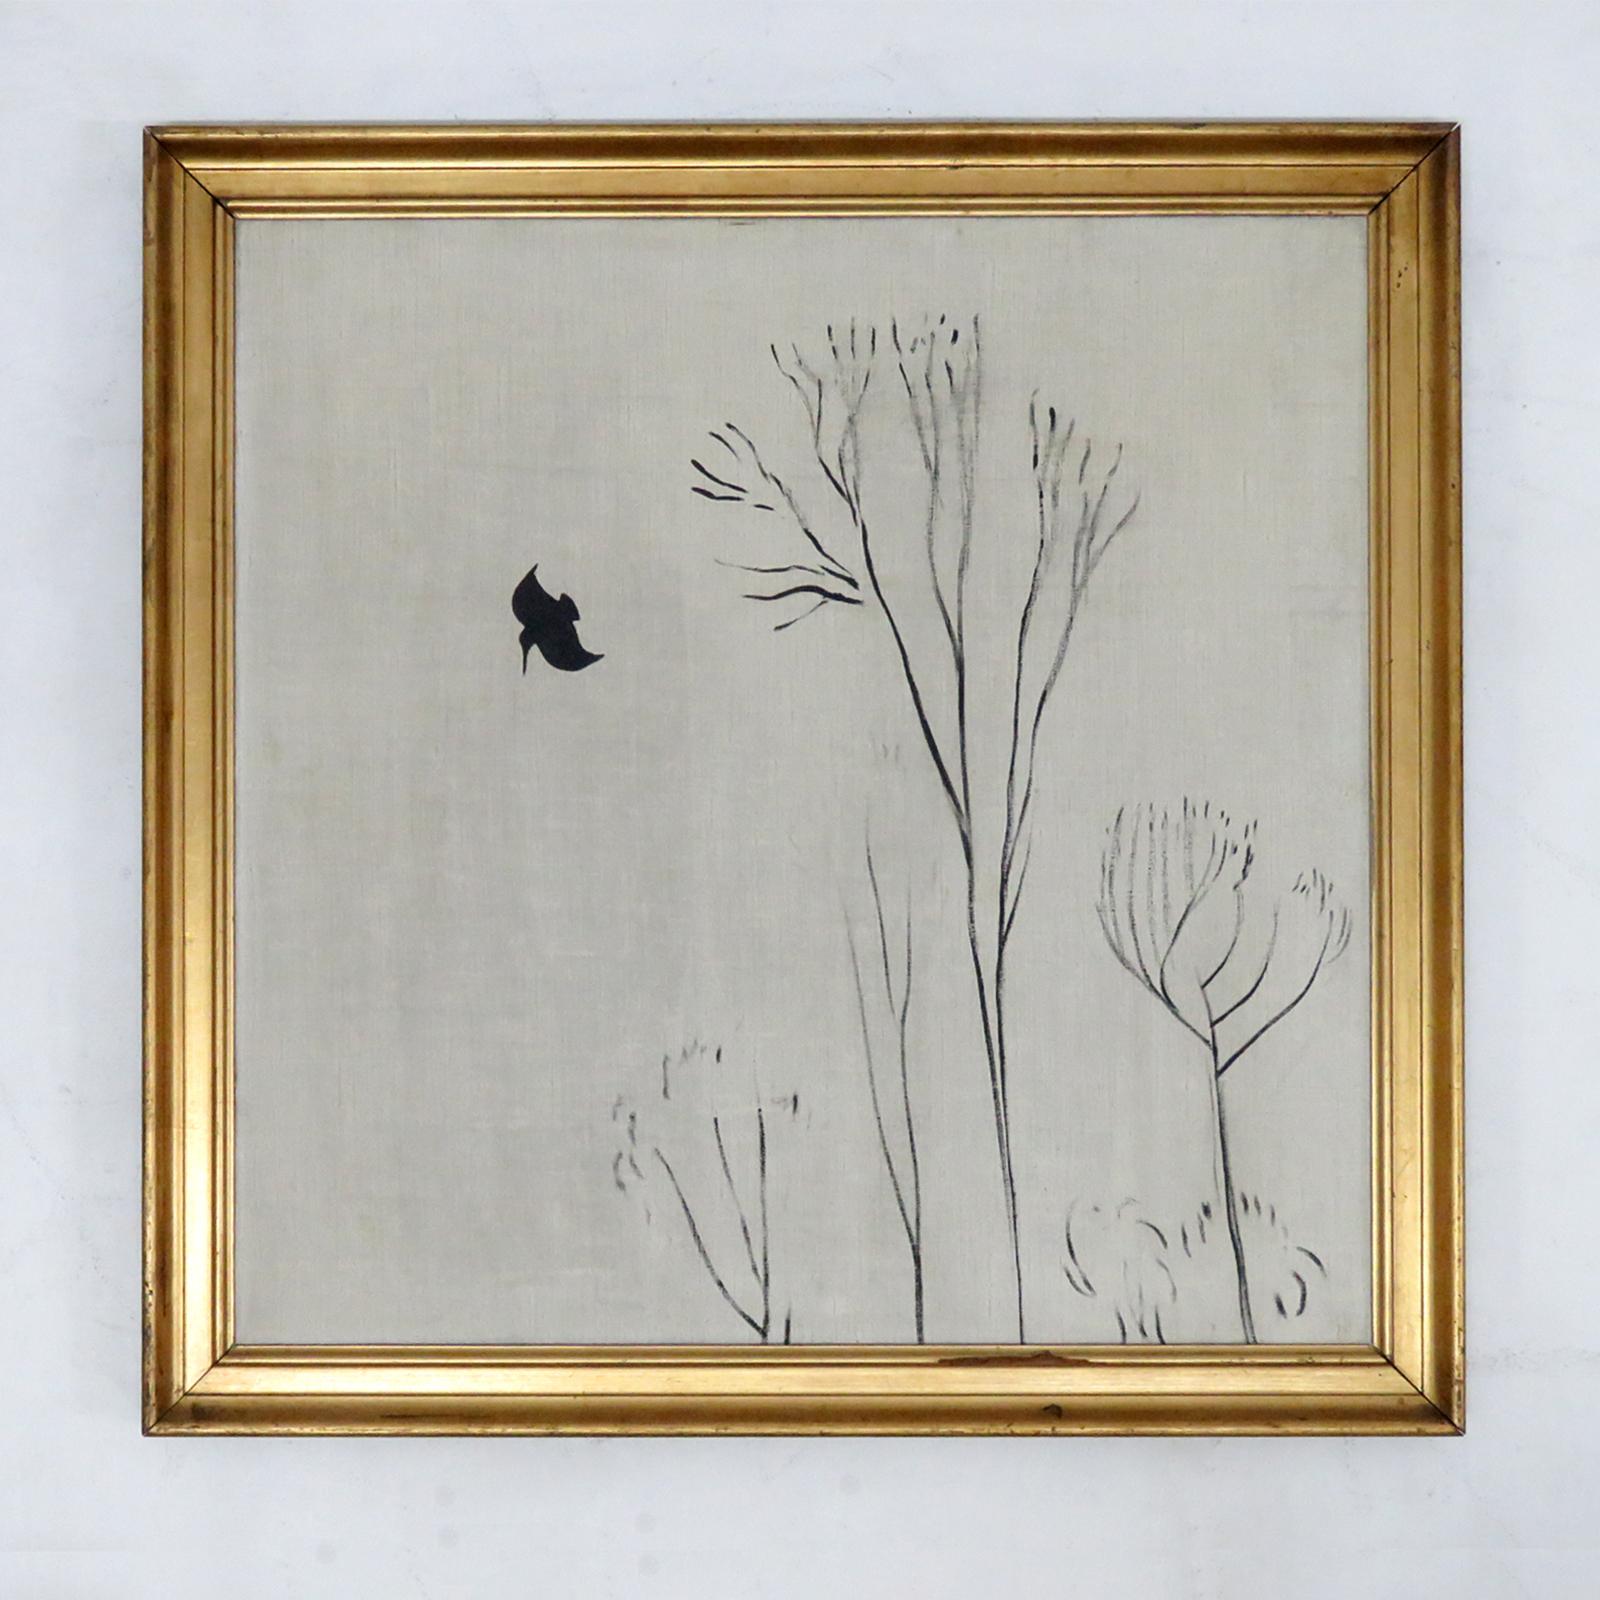 Wonderful painting in oil on canvas by Danish painter Ernst Hansen (1892-1968), 'bird/trees in the wind' composition, framed, signed and dated 1924.